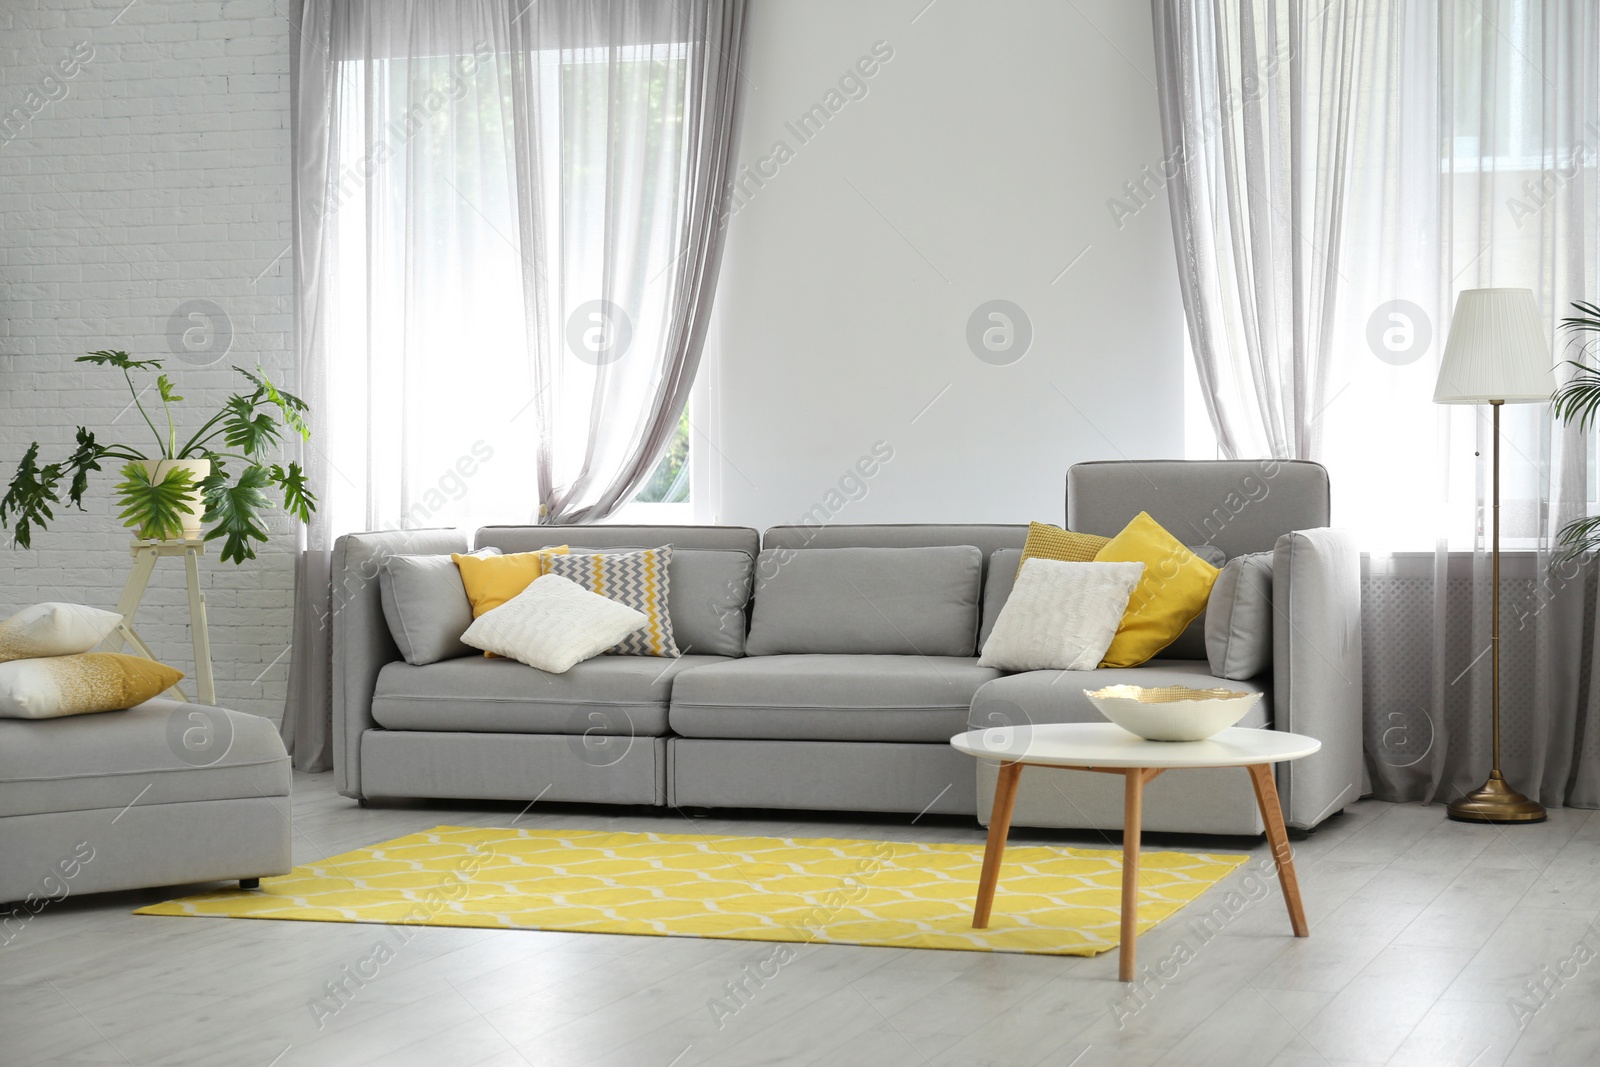 Photo of Living room with comfortable sofa and stylish decor. Idea for interior design